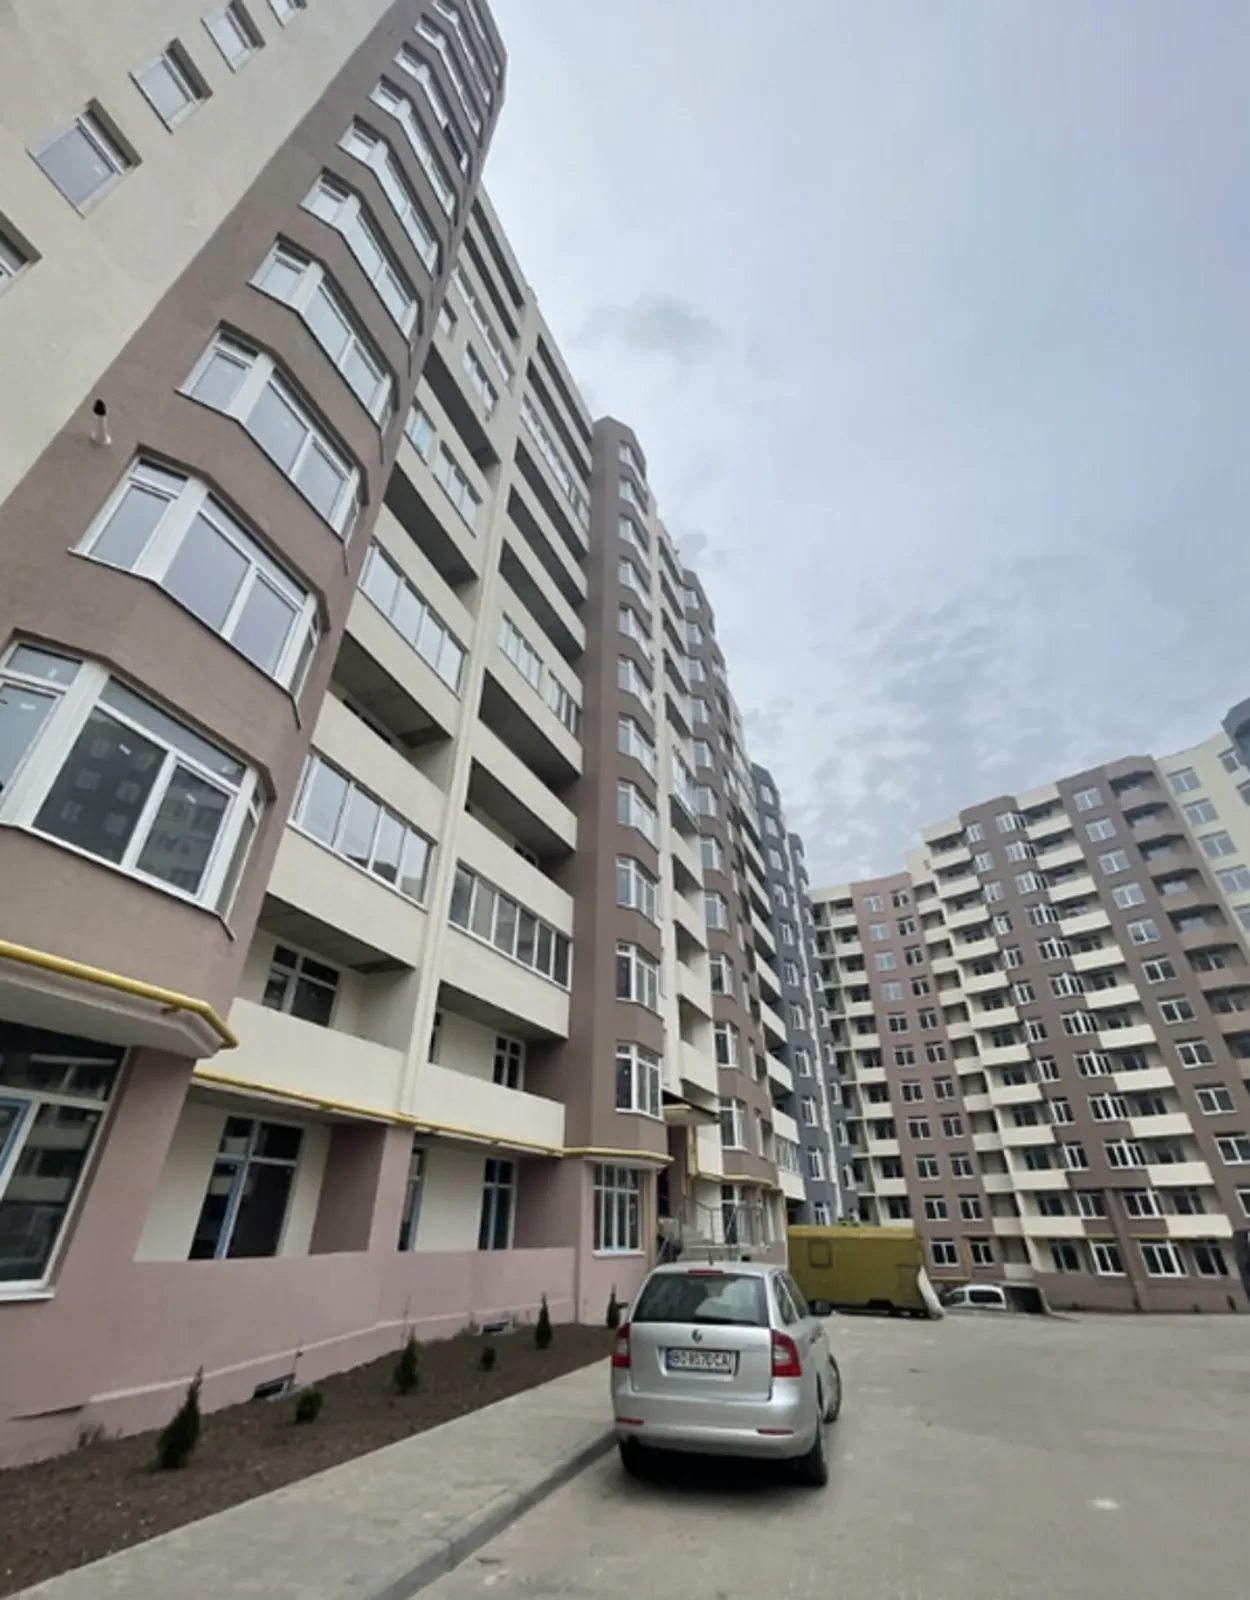 Apartments for sale. 2 rooms, 77 m², 1st floor/11 floors. Bam, Ternopil. 